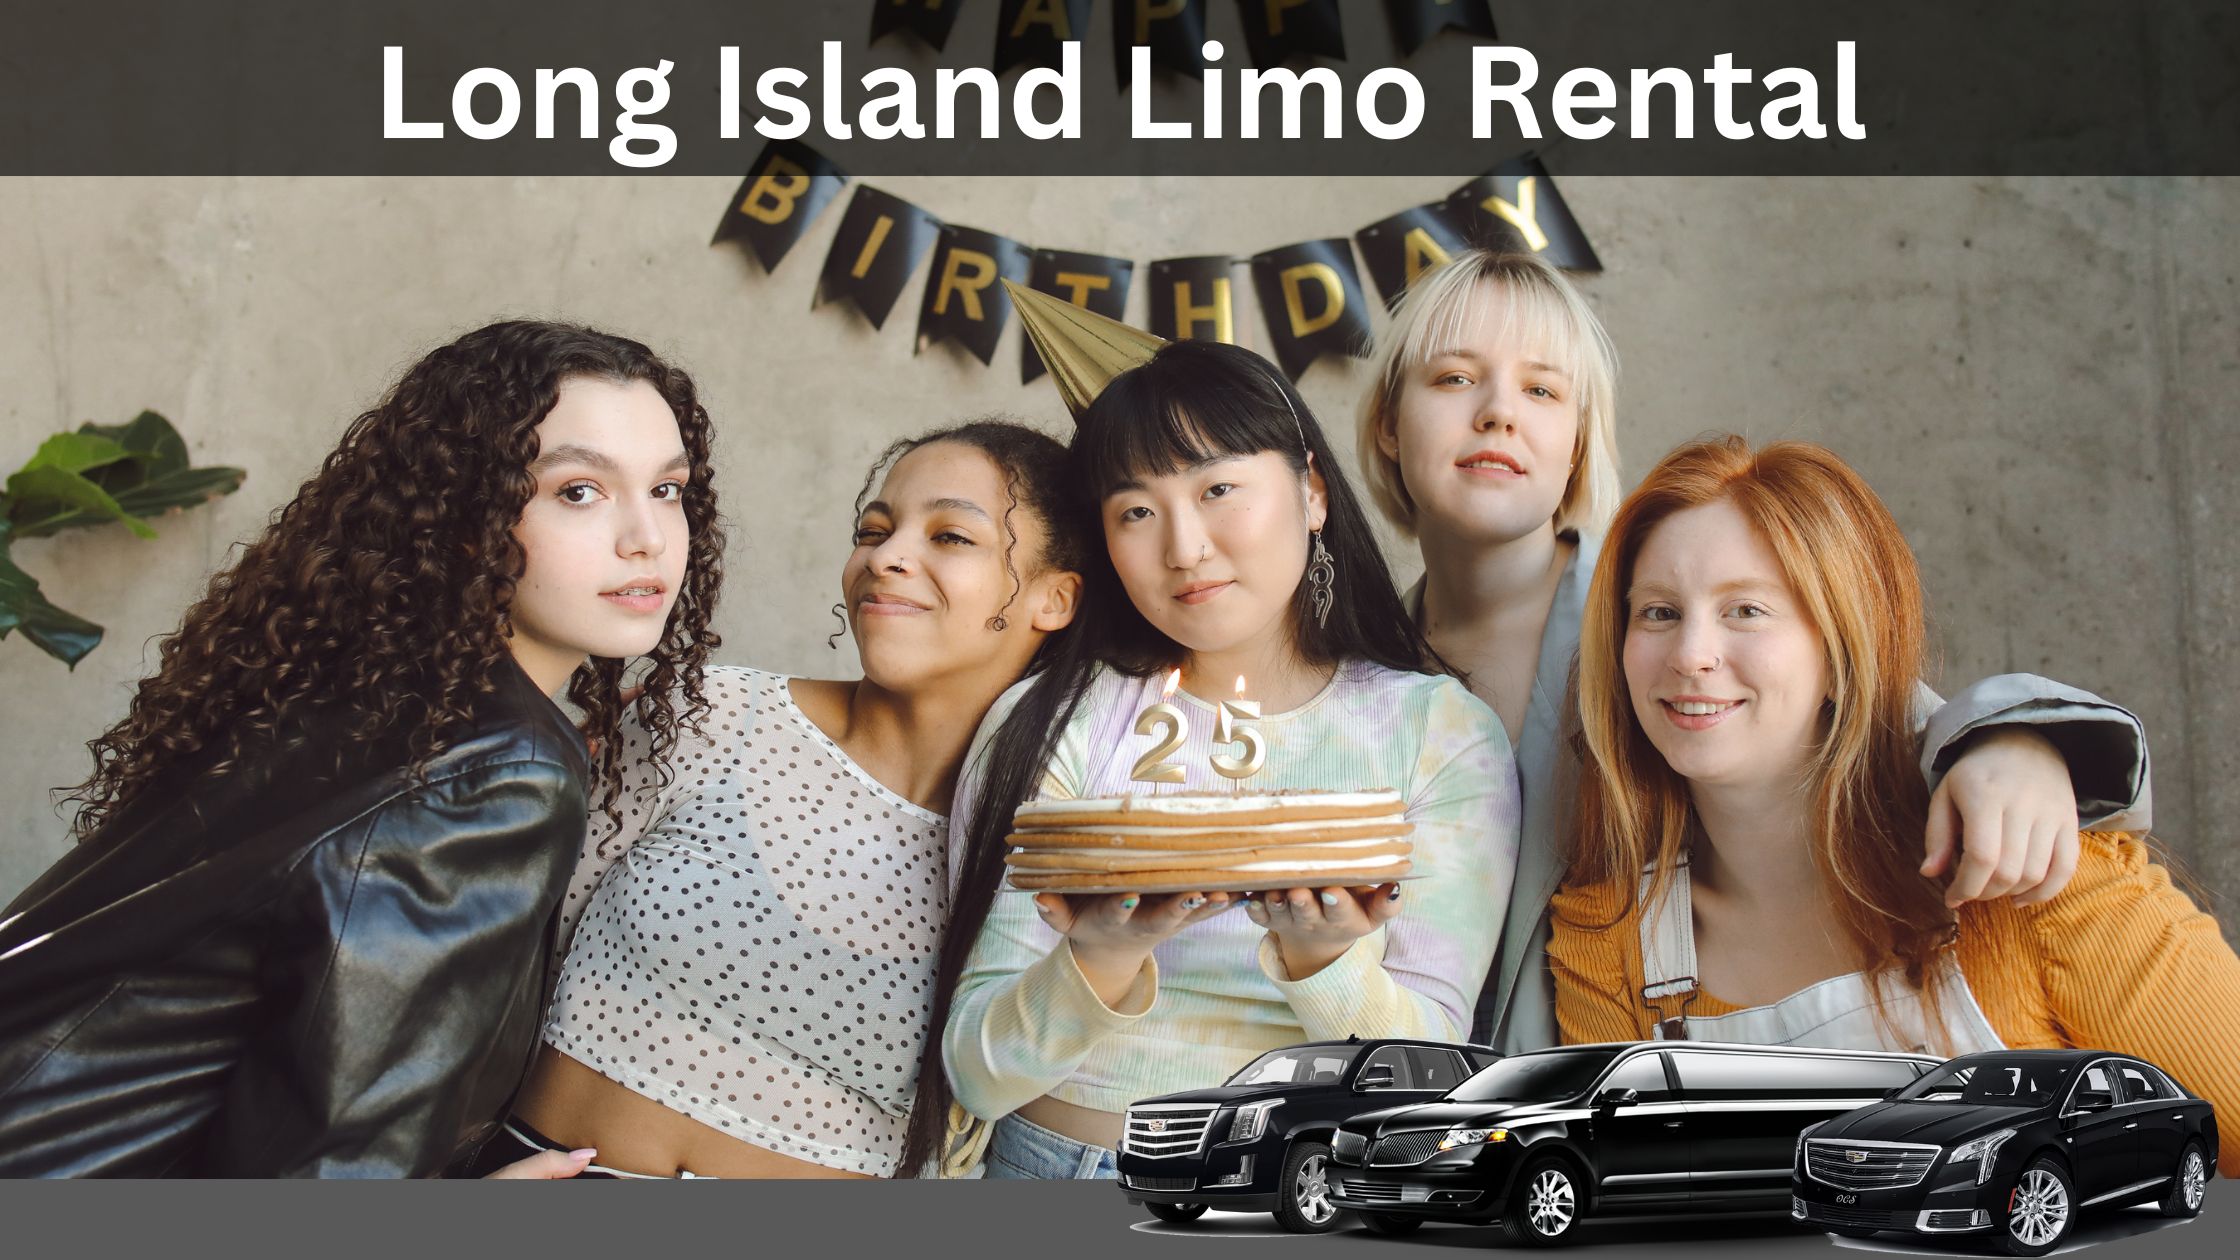 Quincesñera Long Island Limo Service: Luxury Transportation for Your Special Day